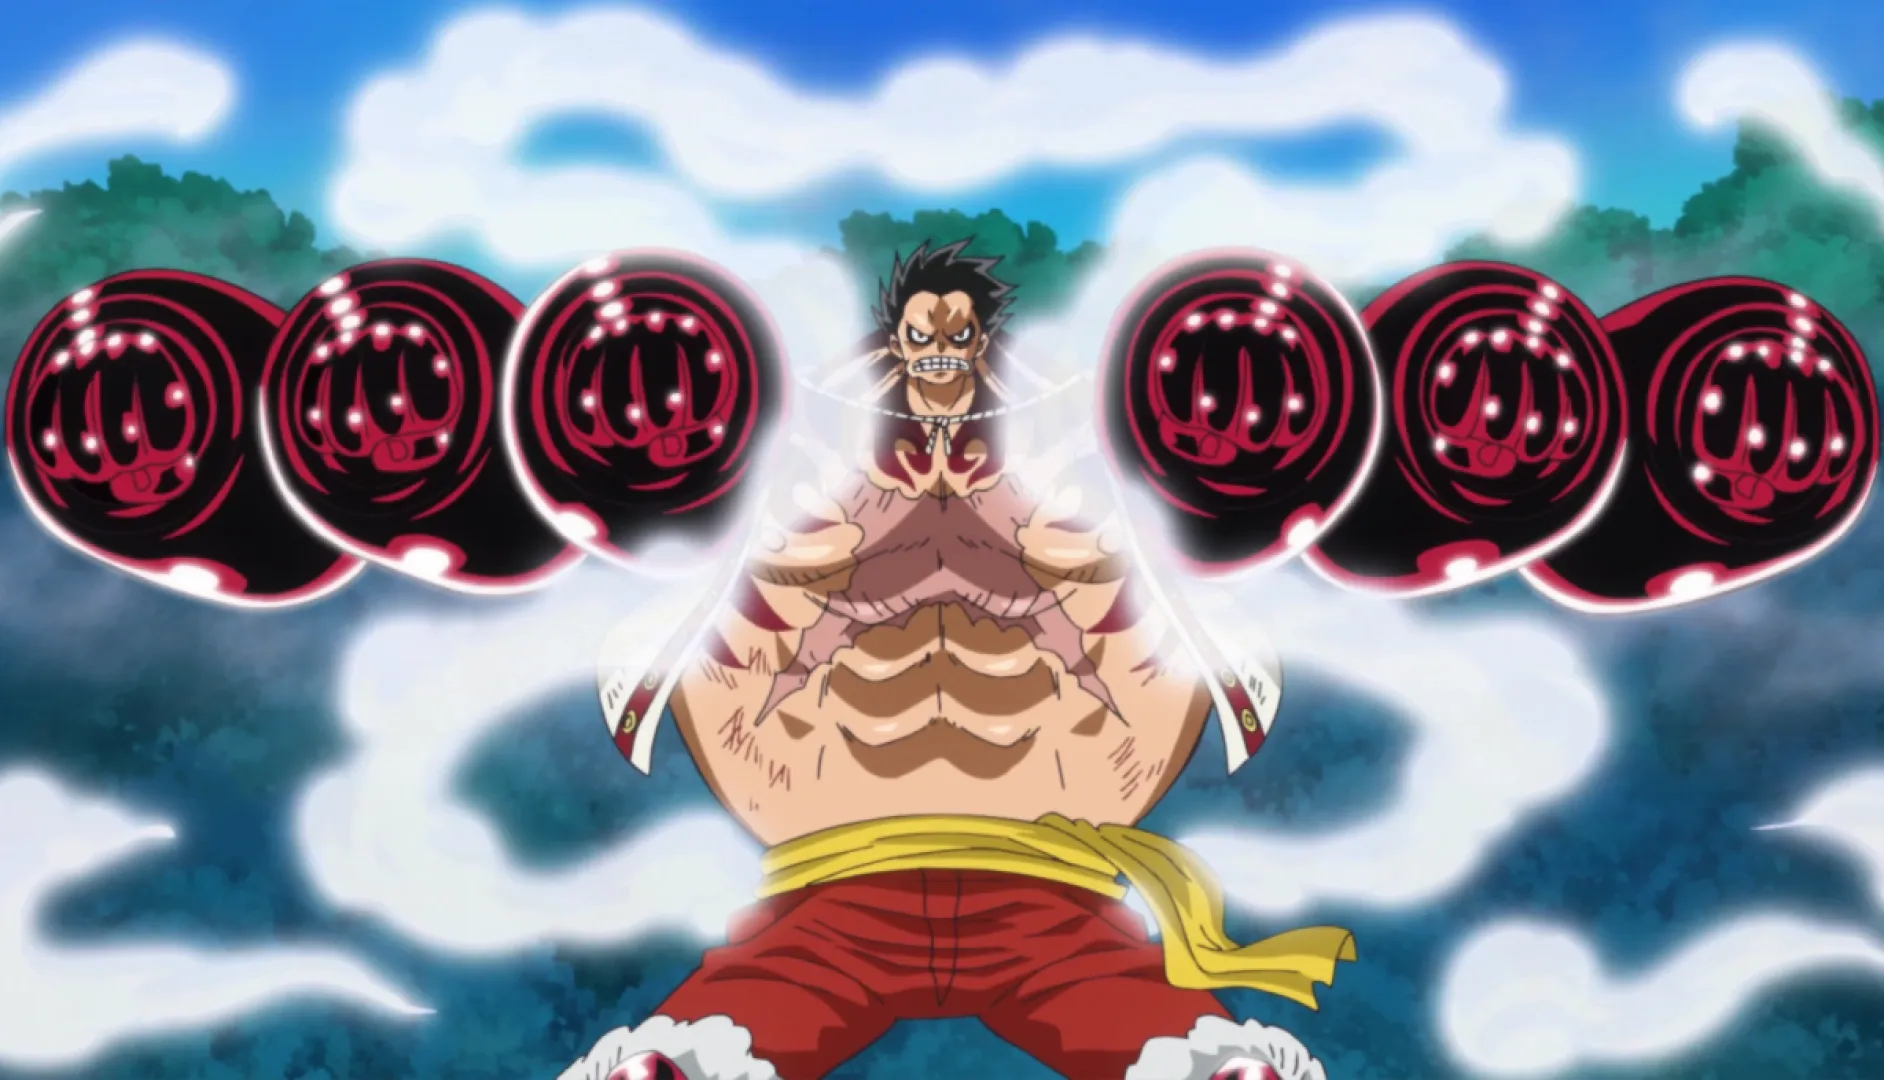 Luffy from One Piece uses Gear 4